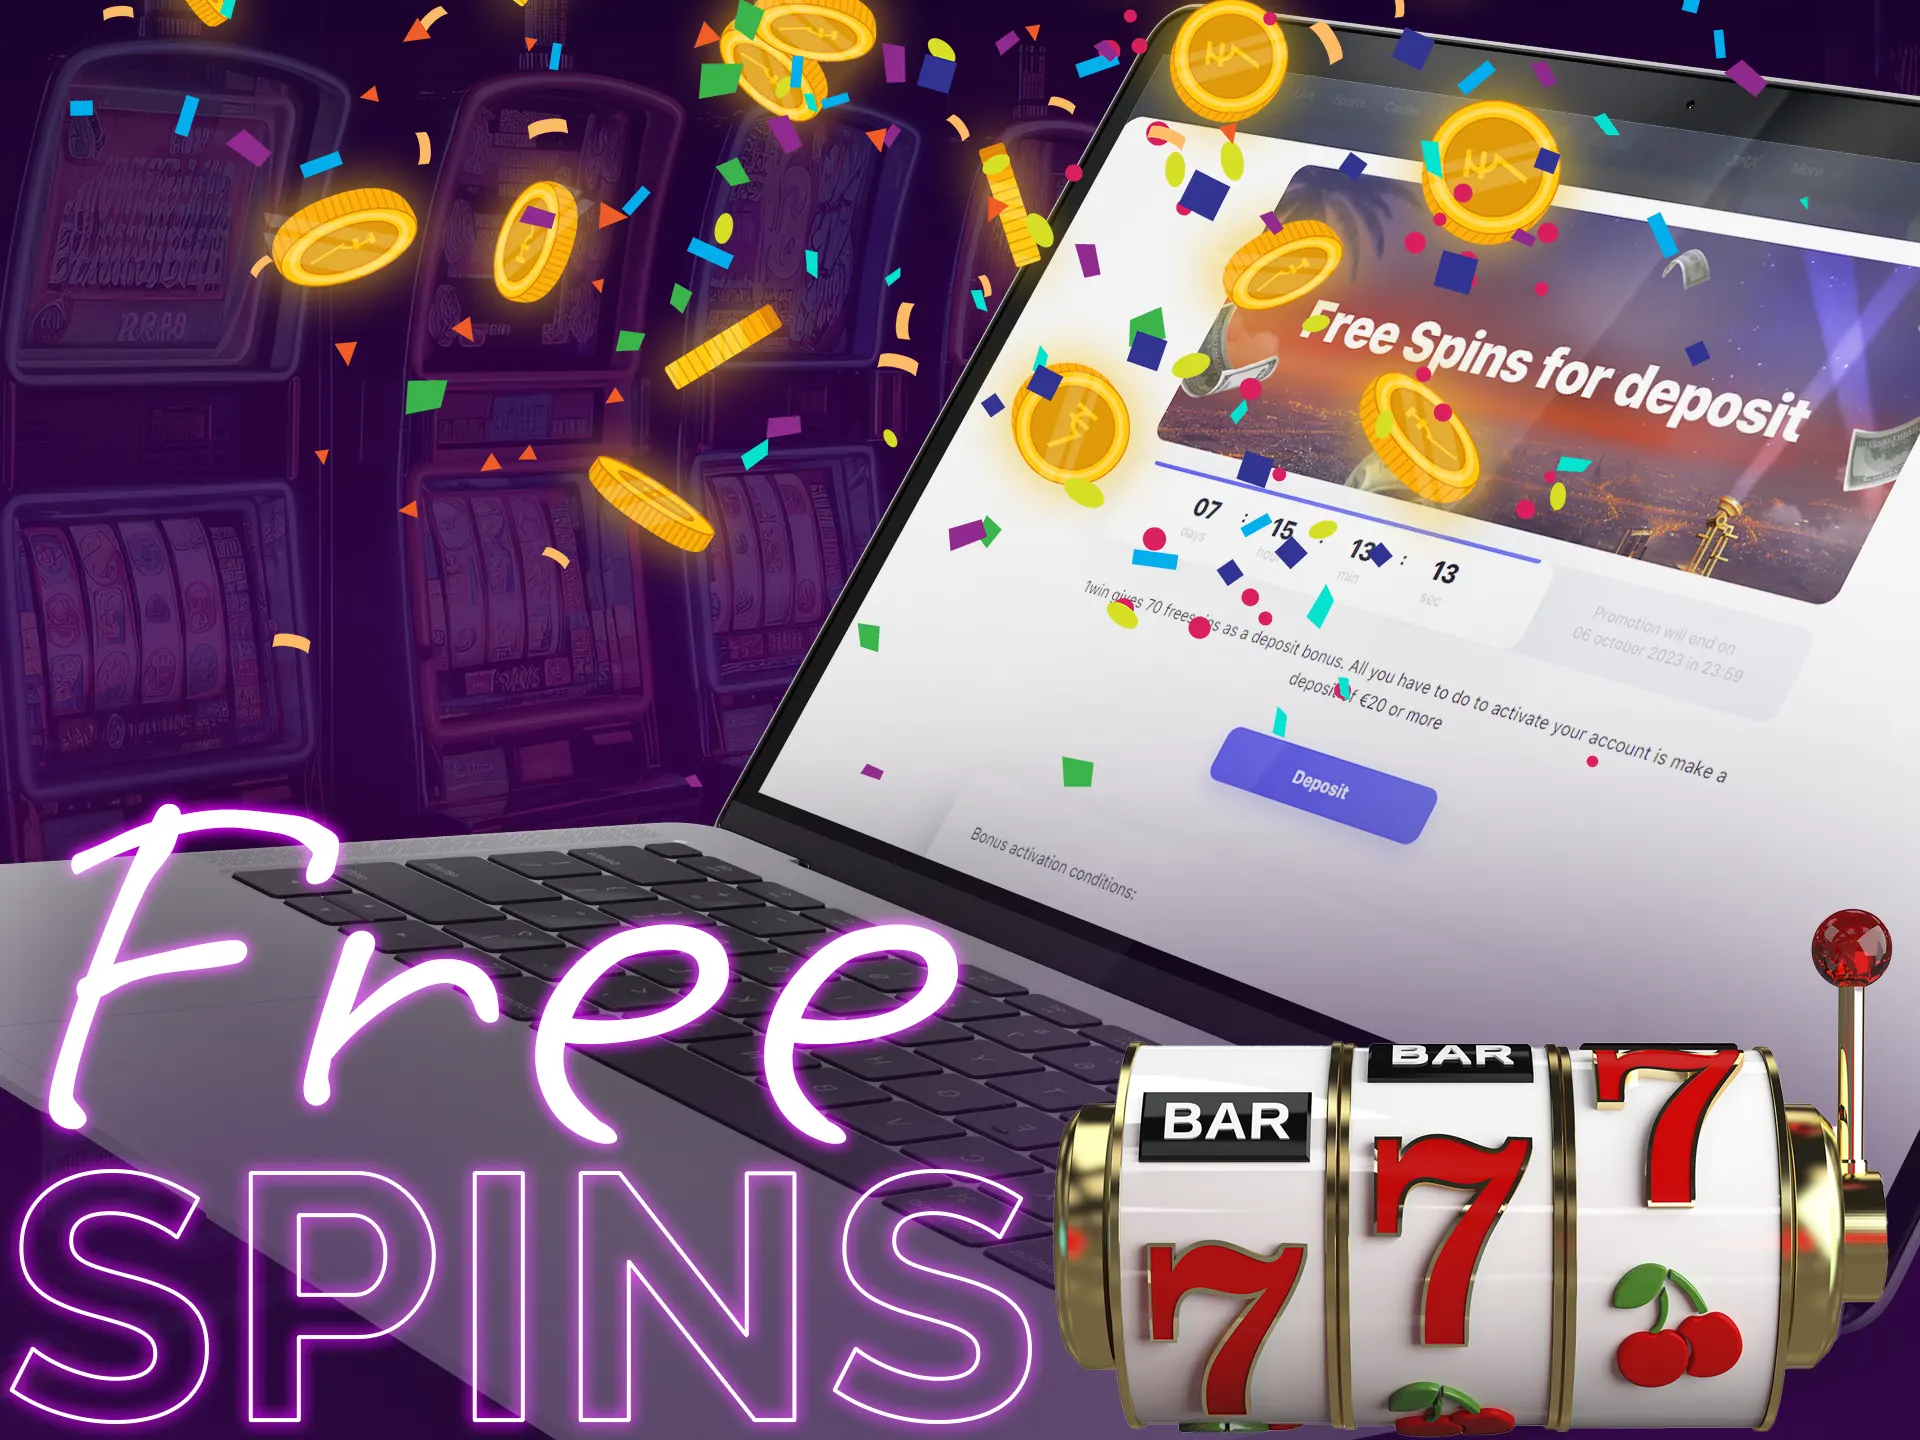 Free Spins - one of the types of no-wagering bonuses.